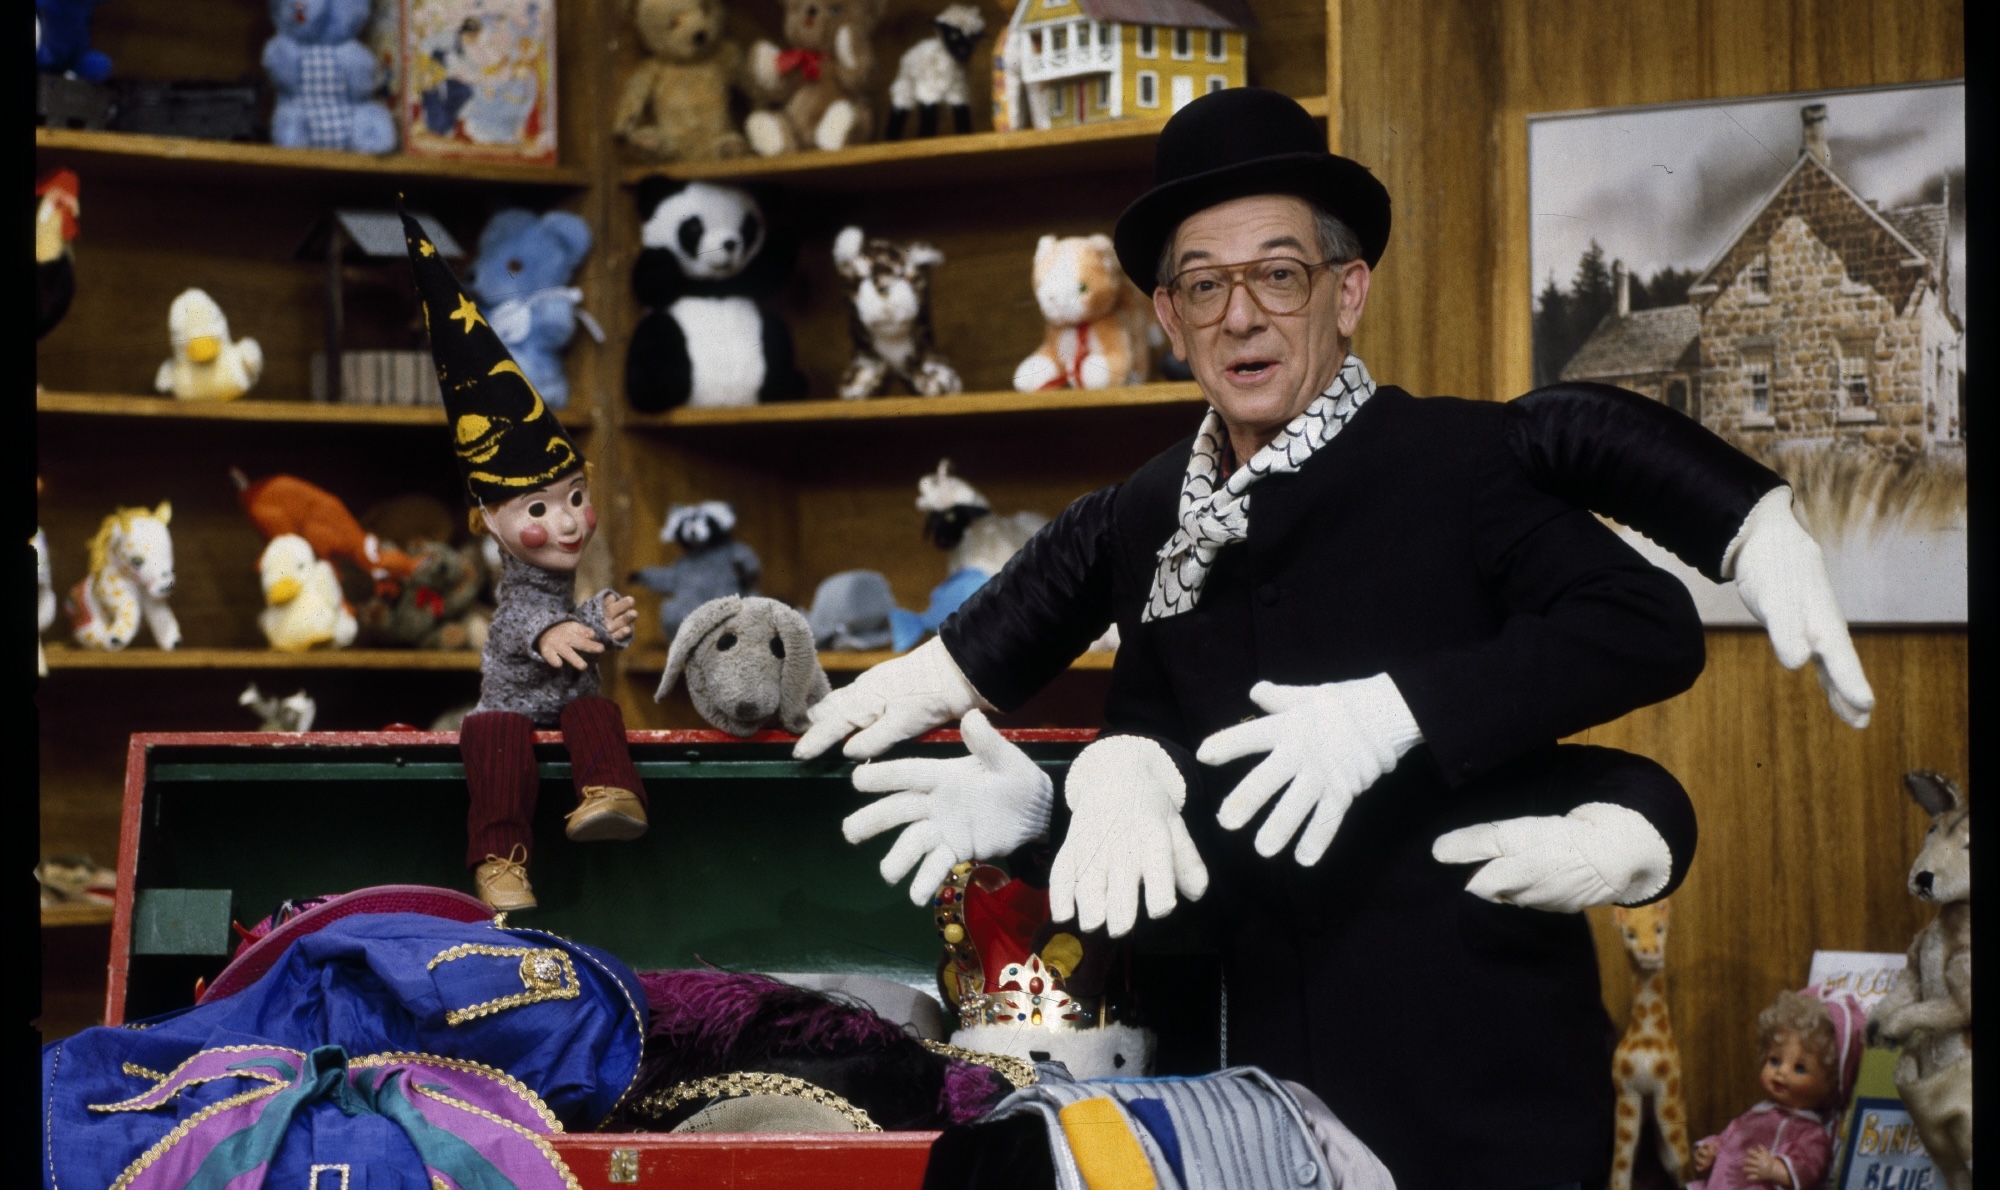 An image of a person wearing a top hat, glasses, and black and white scarf. To their left is a red tickle trunk with flowers painted onto it. The trunk is full of colourful clothes spilling over the edge. The person has on a fantastical black top, making it seem like they have six arms with white gloves covering the hands. In the background are shelves full of stuffed animals and other toys.